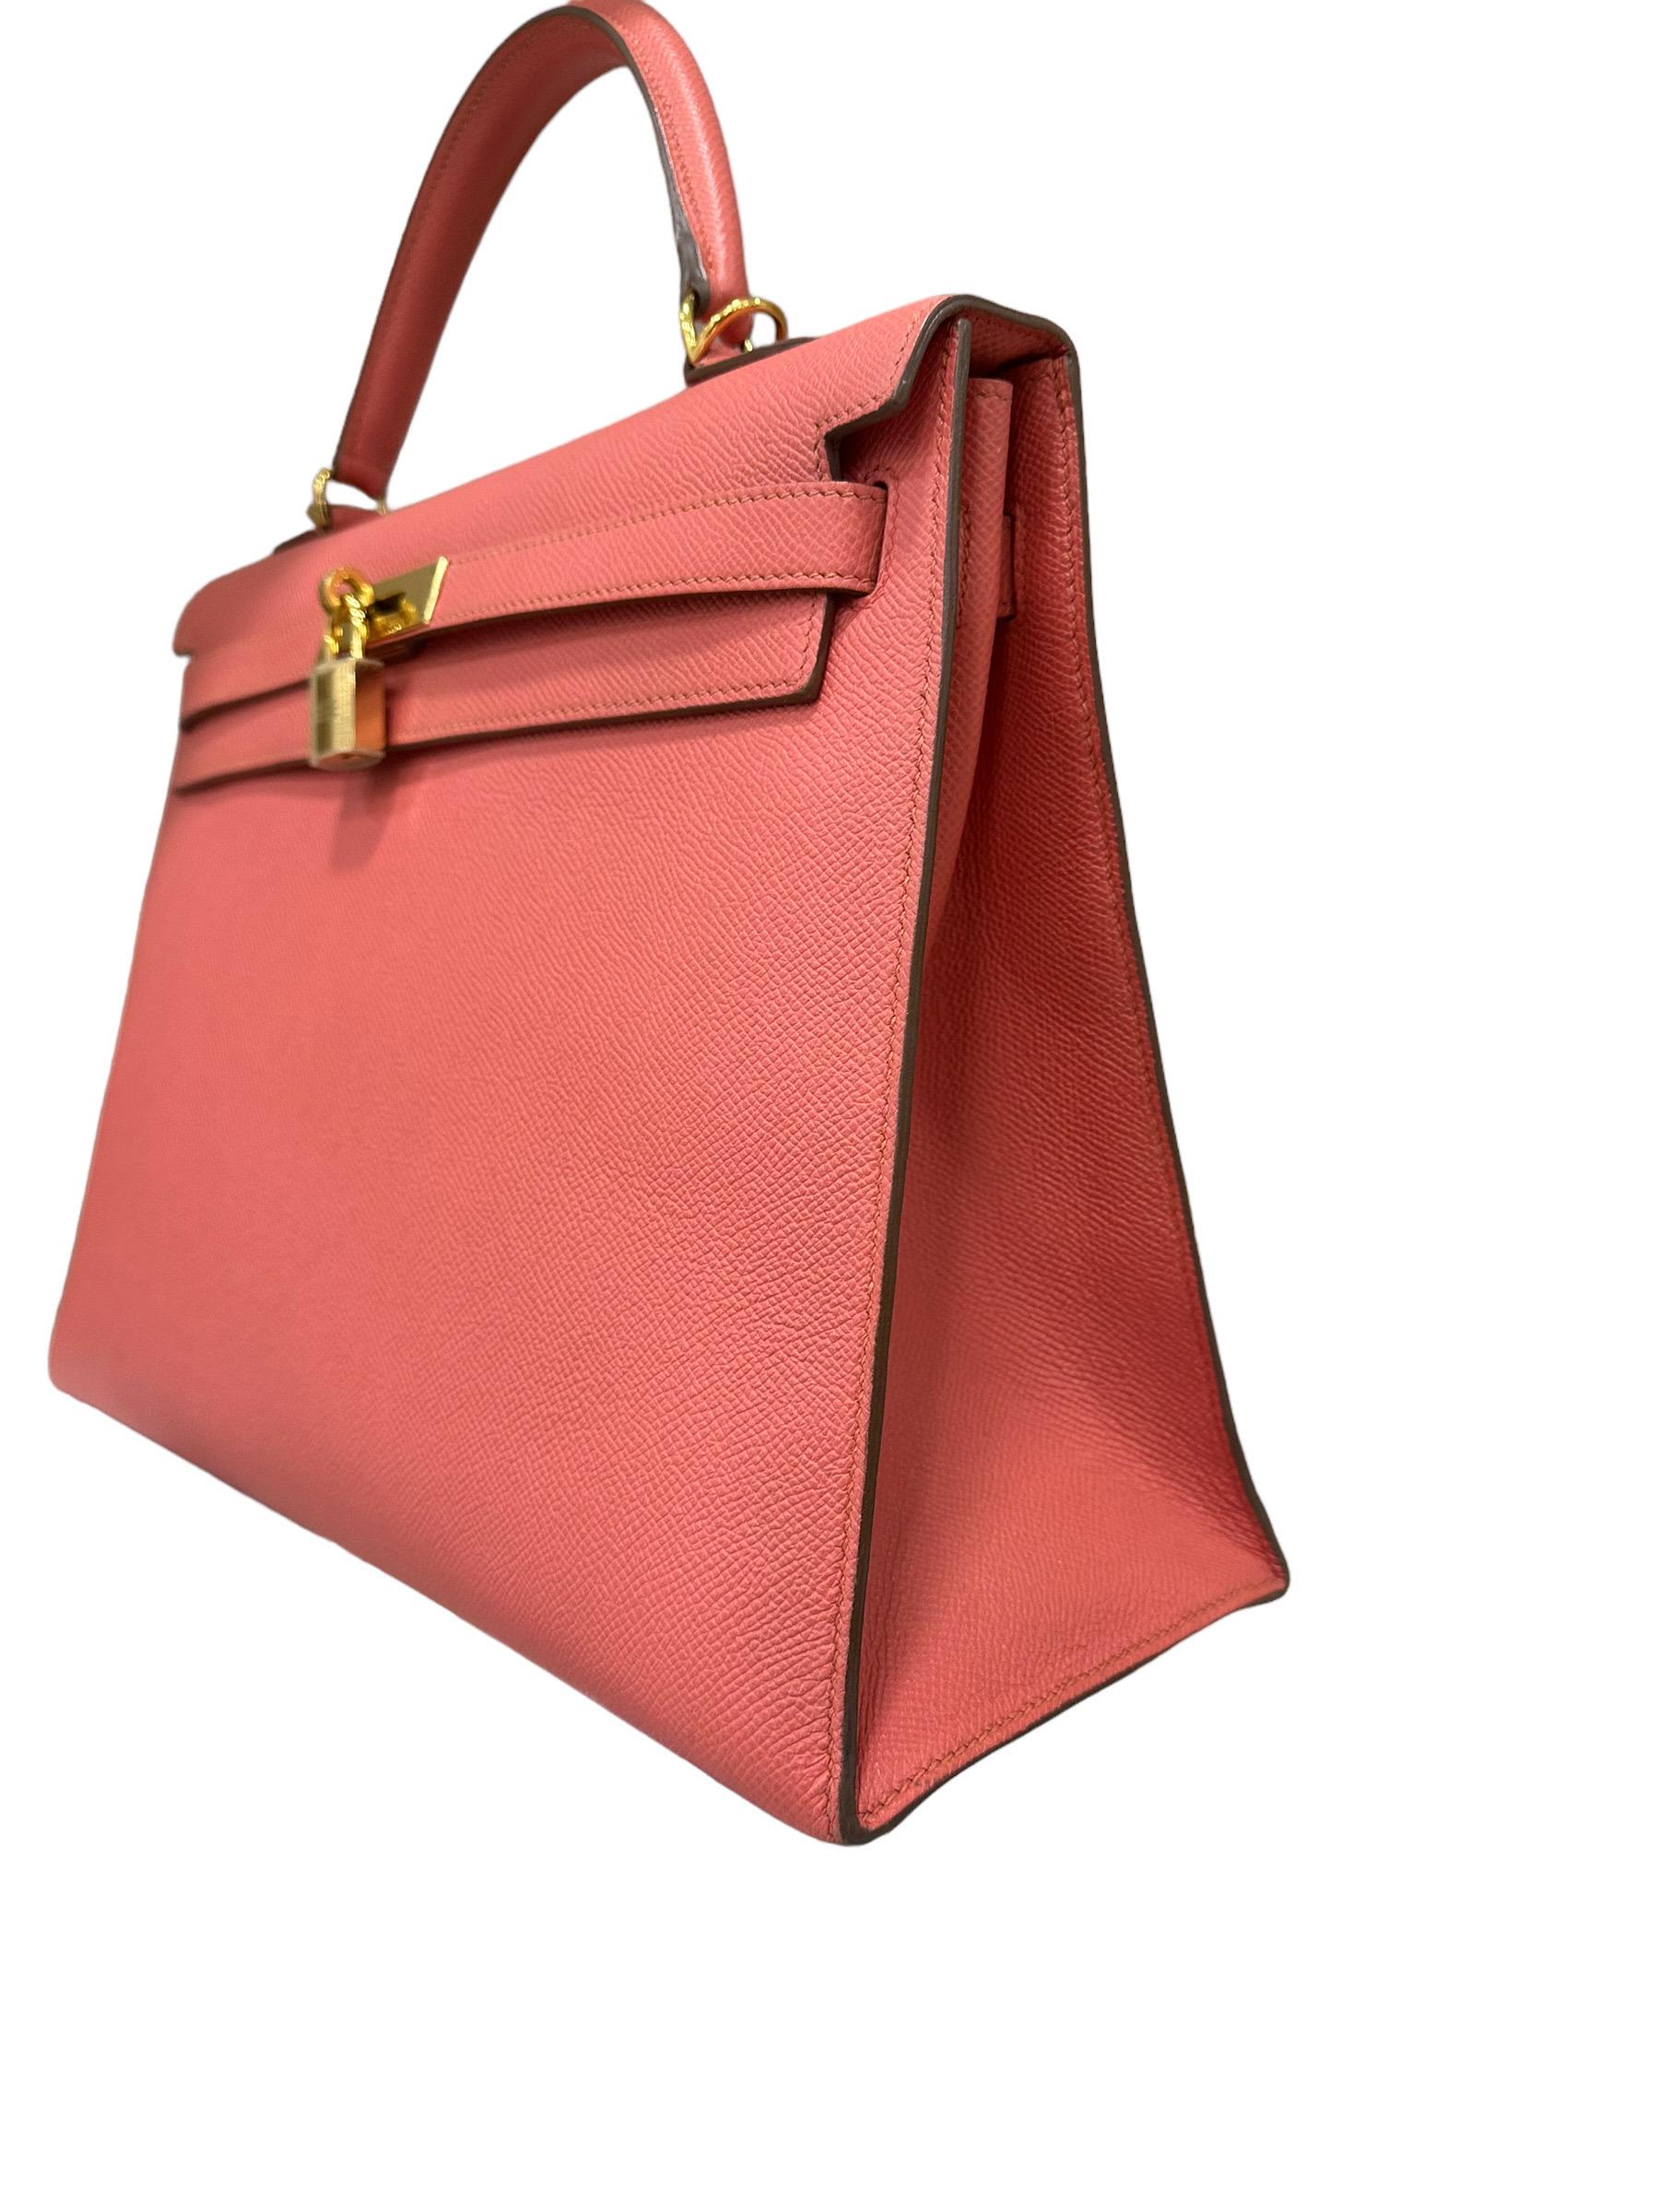 Bag by Hermès, Kelly model, size 35, made of rigid Epsom leather, in Jaipur pink colour. Equipped with a flap with interlocking closure with horizontal band, padlock and keys. Equipped with a central handle for hand carrying and a removable shoulder